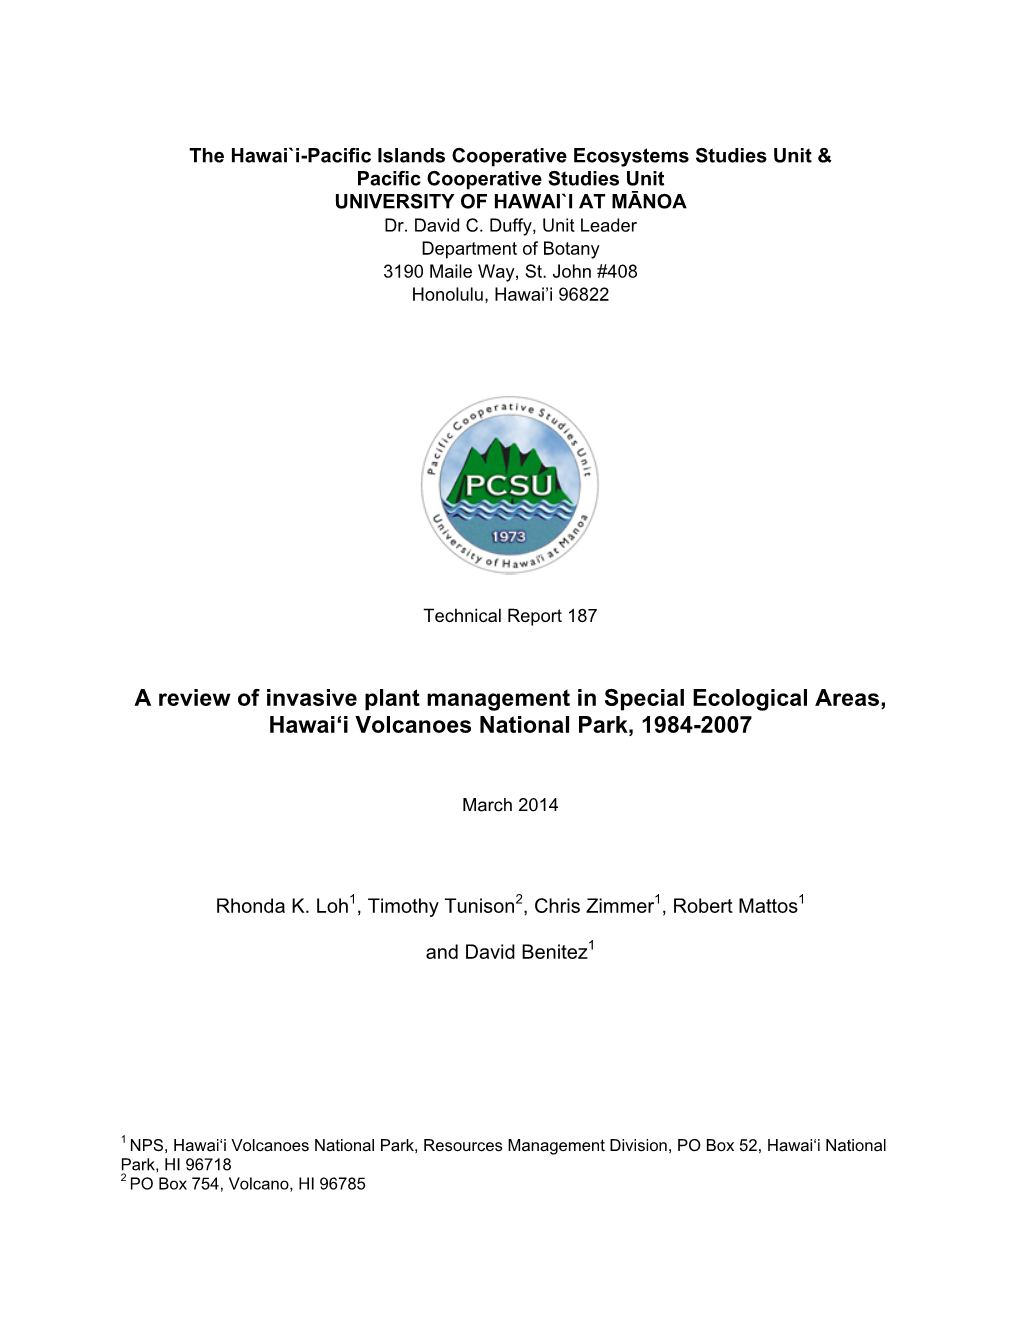 A Review of Invasive Plant Management in Special Ecological Areas, Hawai‘I Volcanoes National Park, 1984-2007